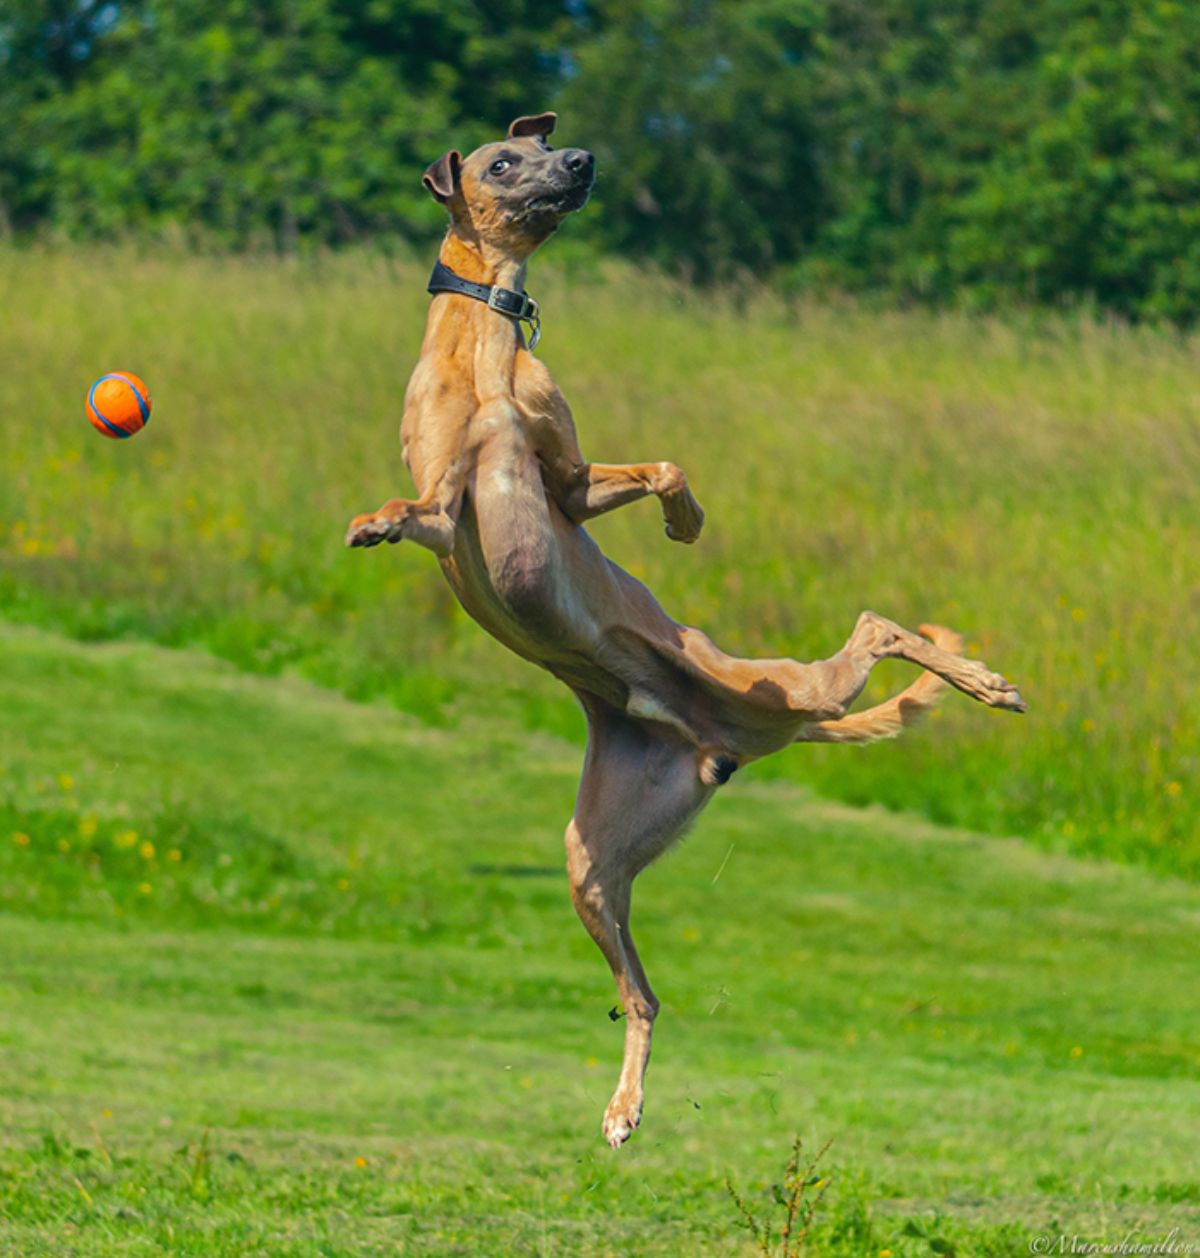 brown dog caught jumping in mid air with an orange and blue ball near it